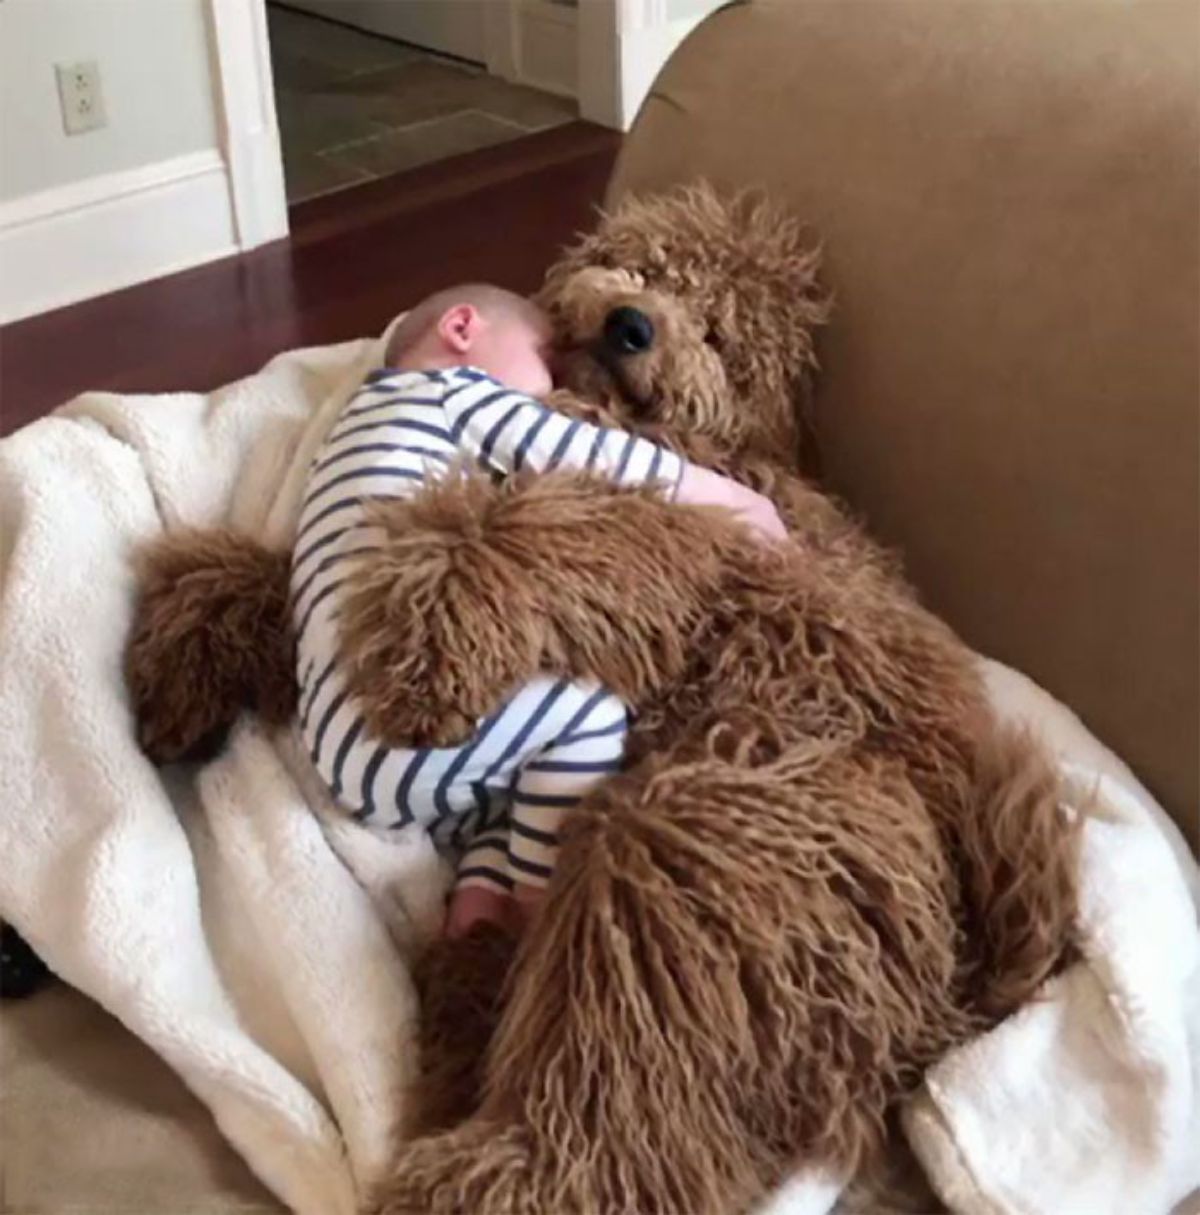 fluffy brown poodle laying on a white blanket on a brown sofa cuddling with a baby